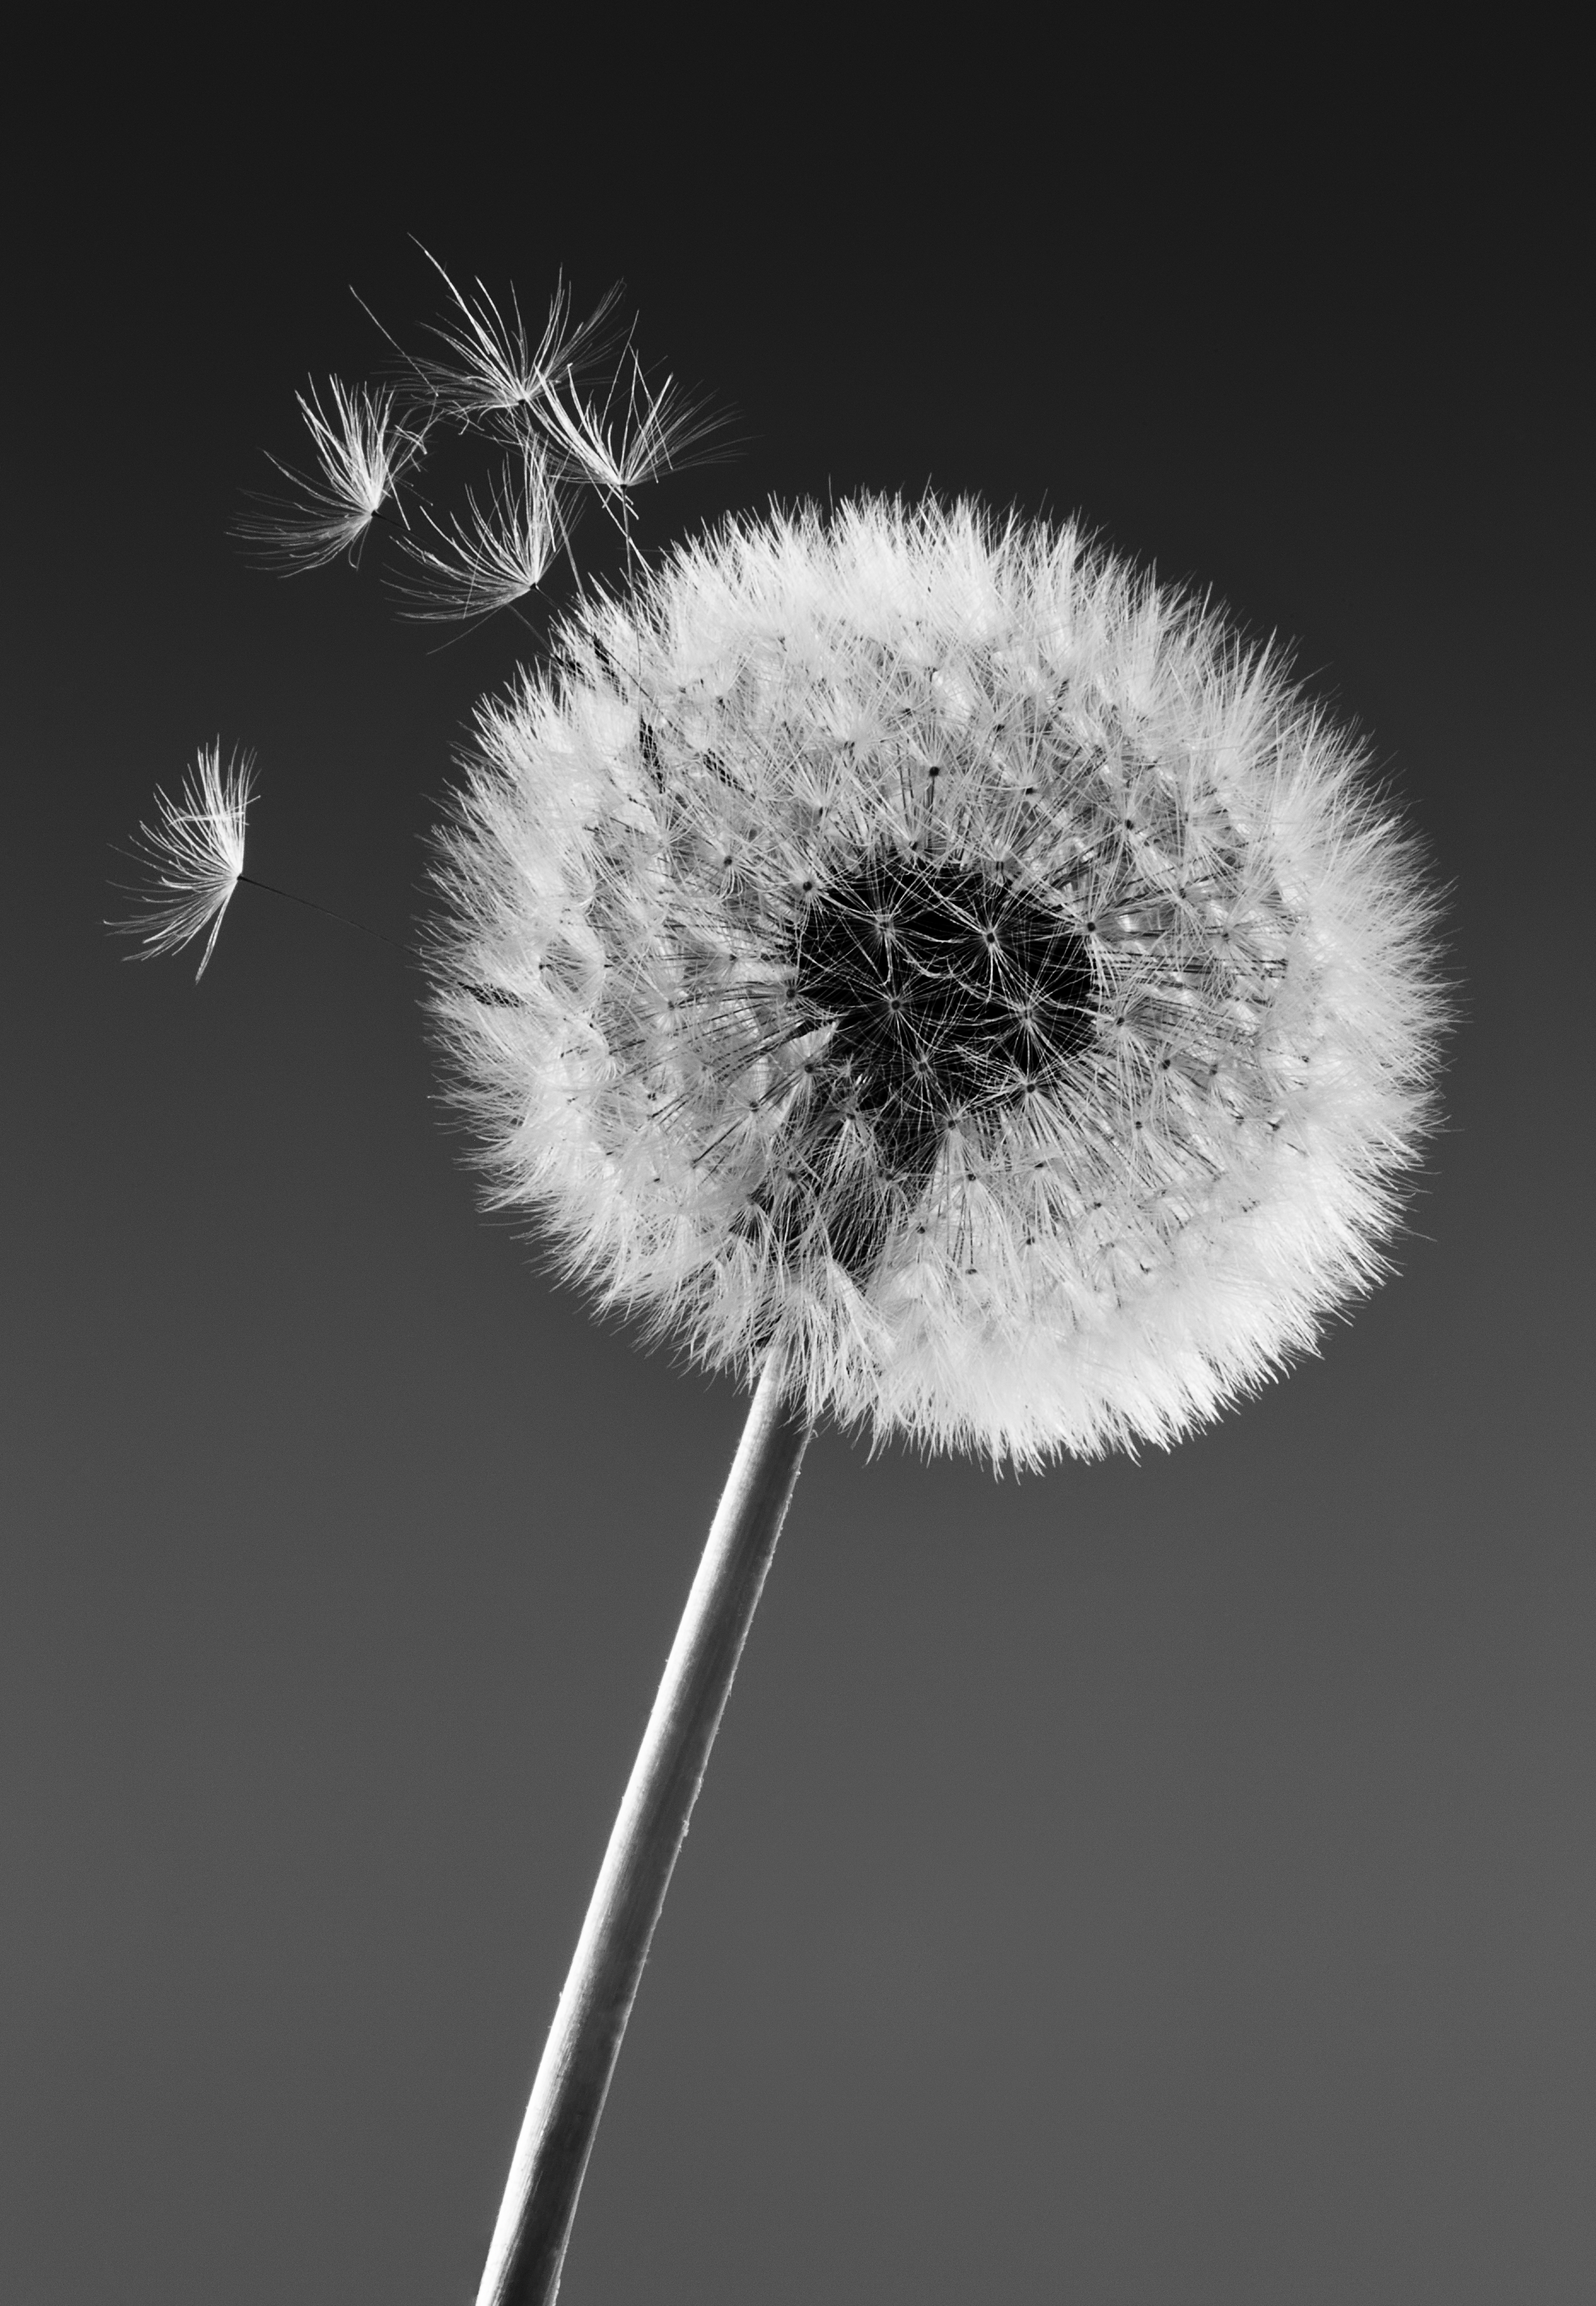 Wallpaper for mobile devices chb, dandelion, bw, nature